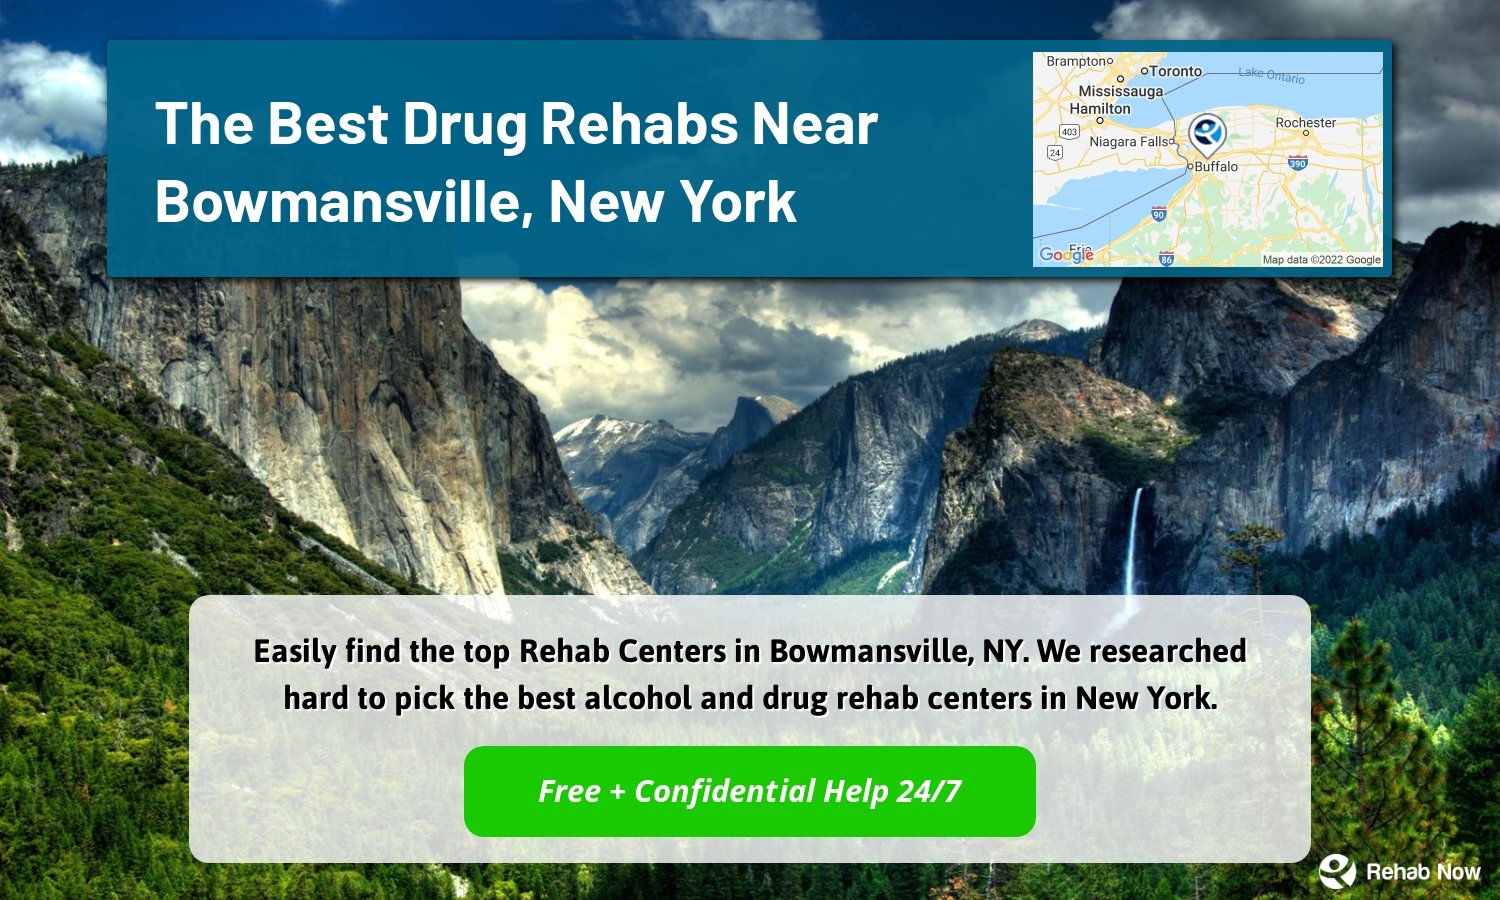 Easily find the top Rehab Centers in Bowmansville, NY. We researched hard to pick the best alcohol and drug rehab centers in New York.